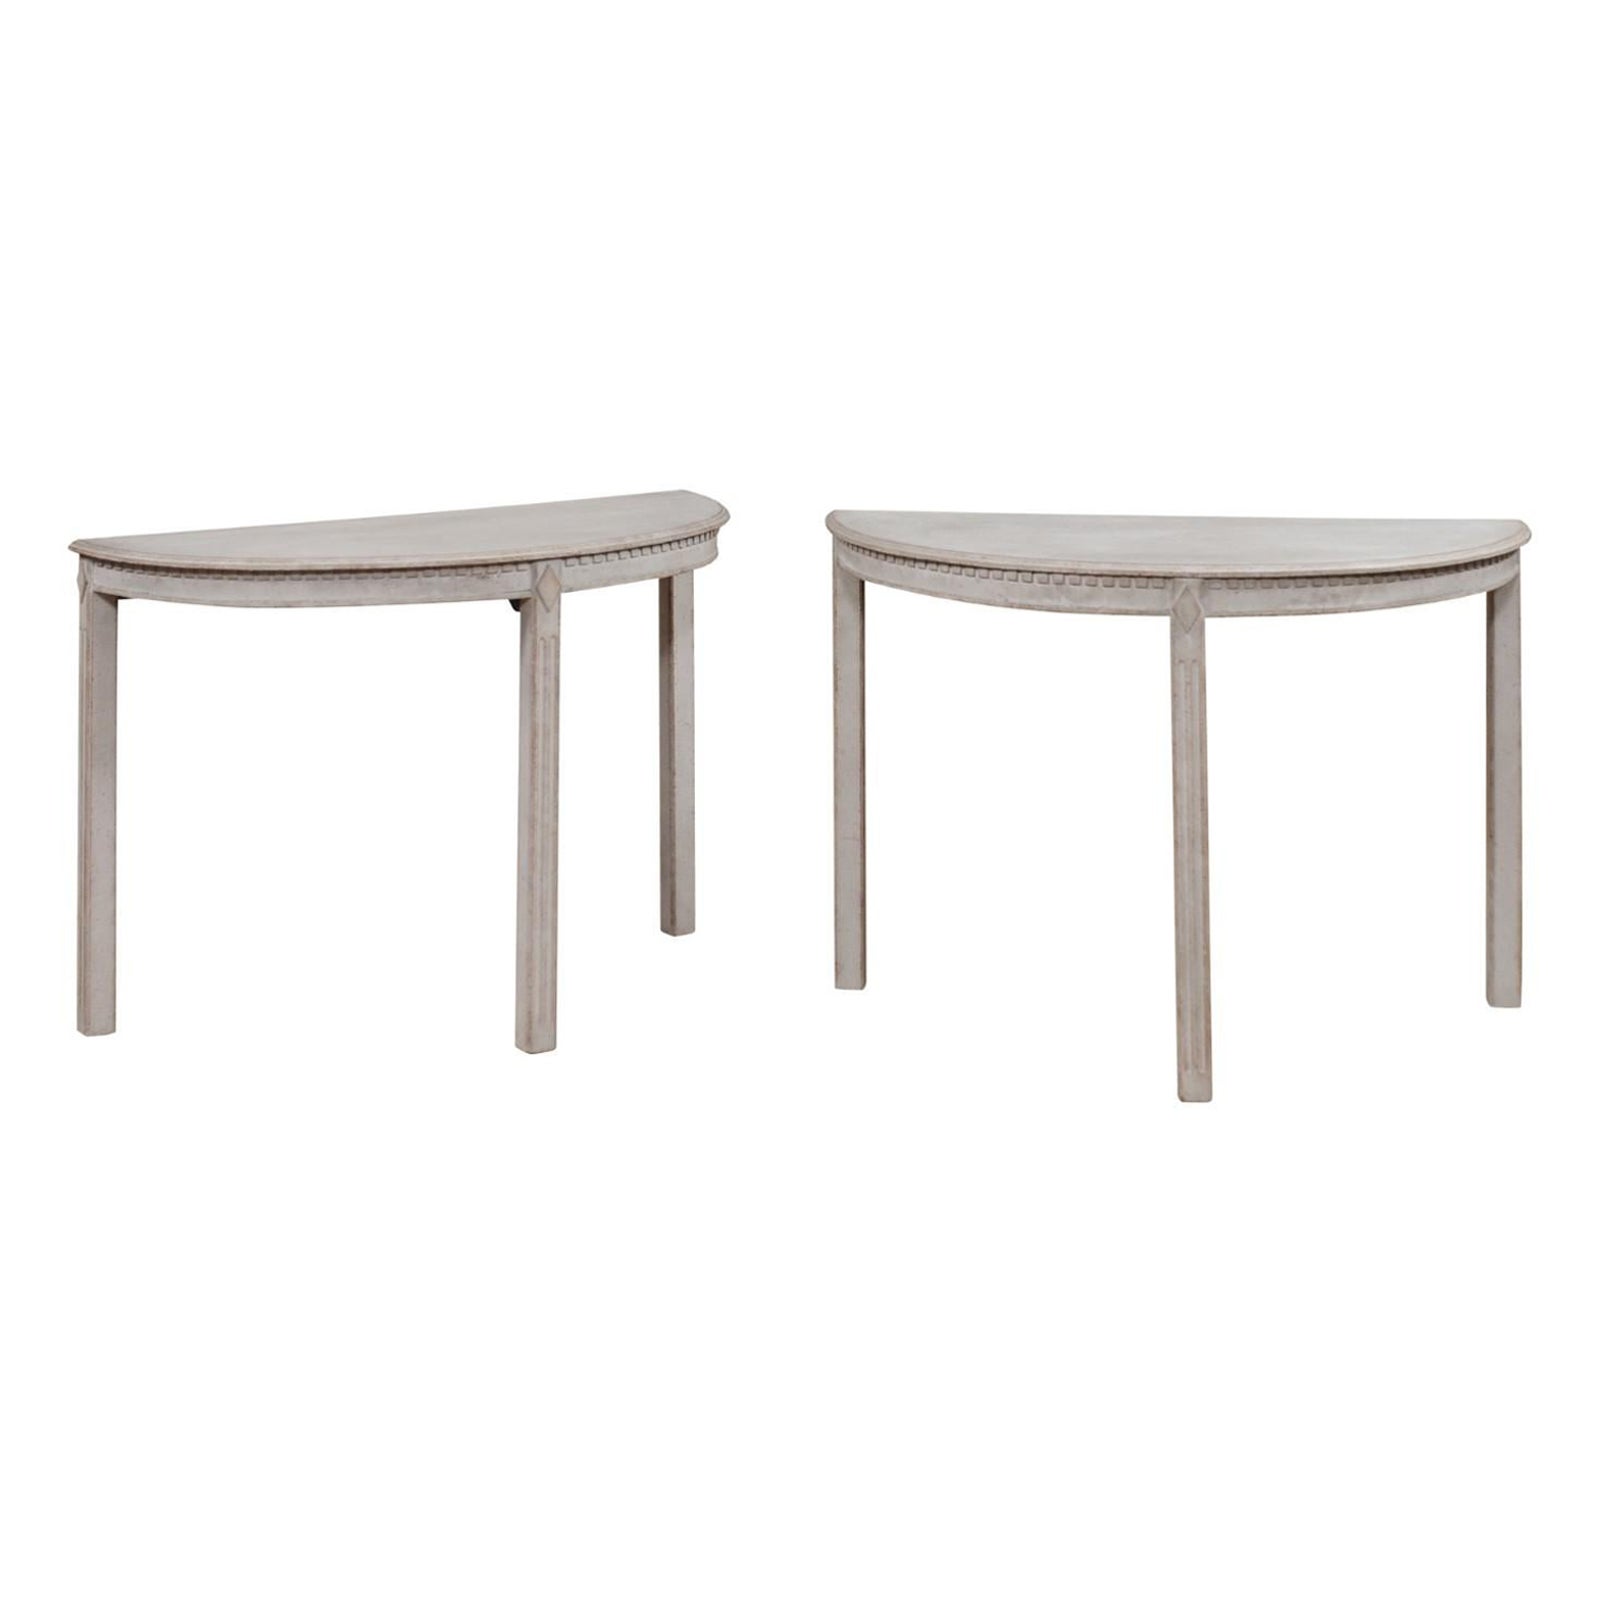 Gray Painted Gustavian Style 1890s Demilune Tables with Carved Dentil, a Pair For Sale